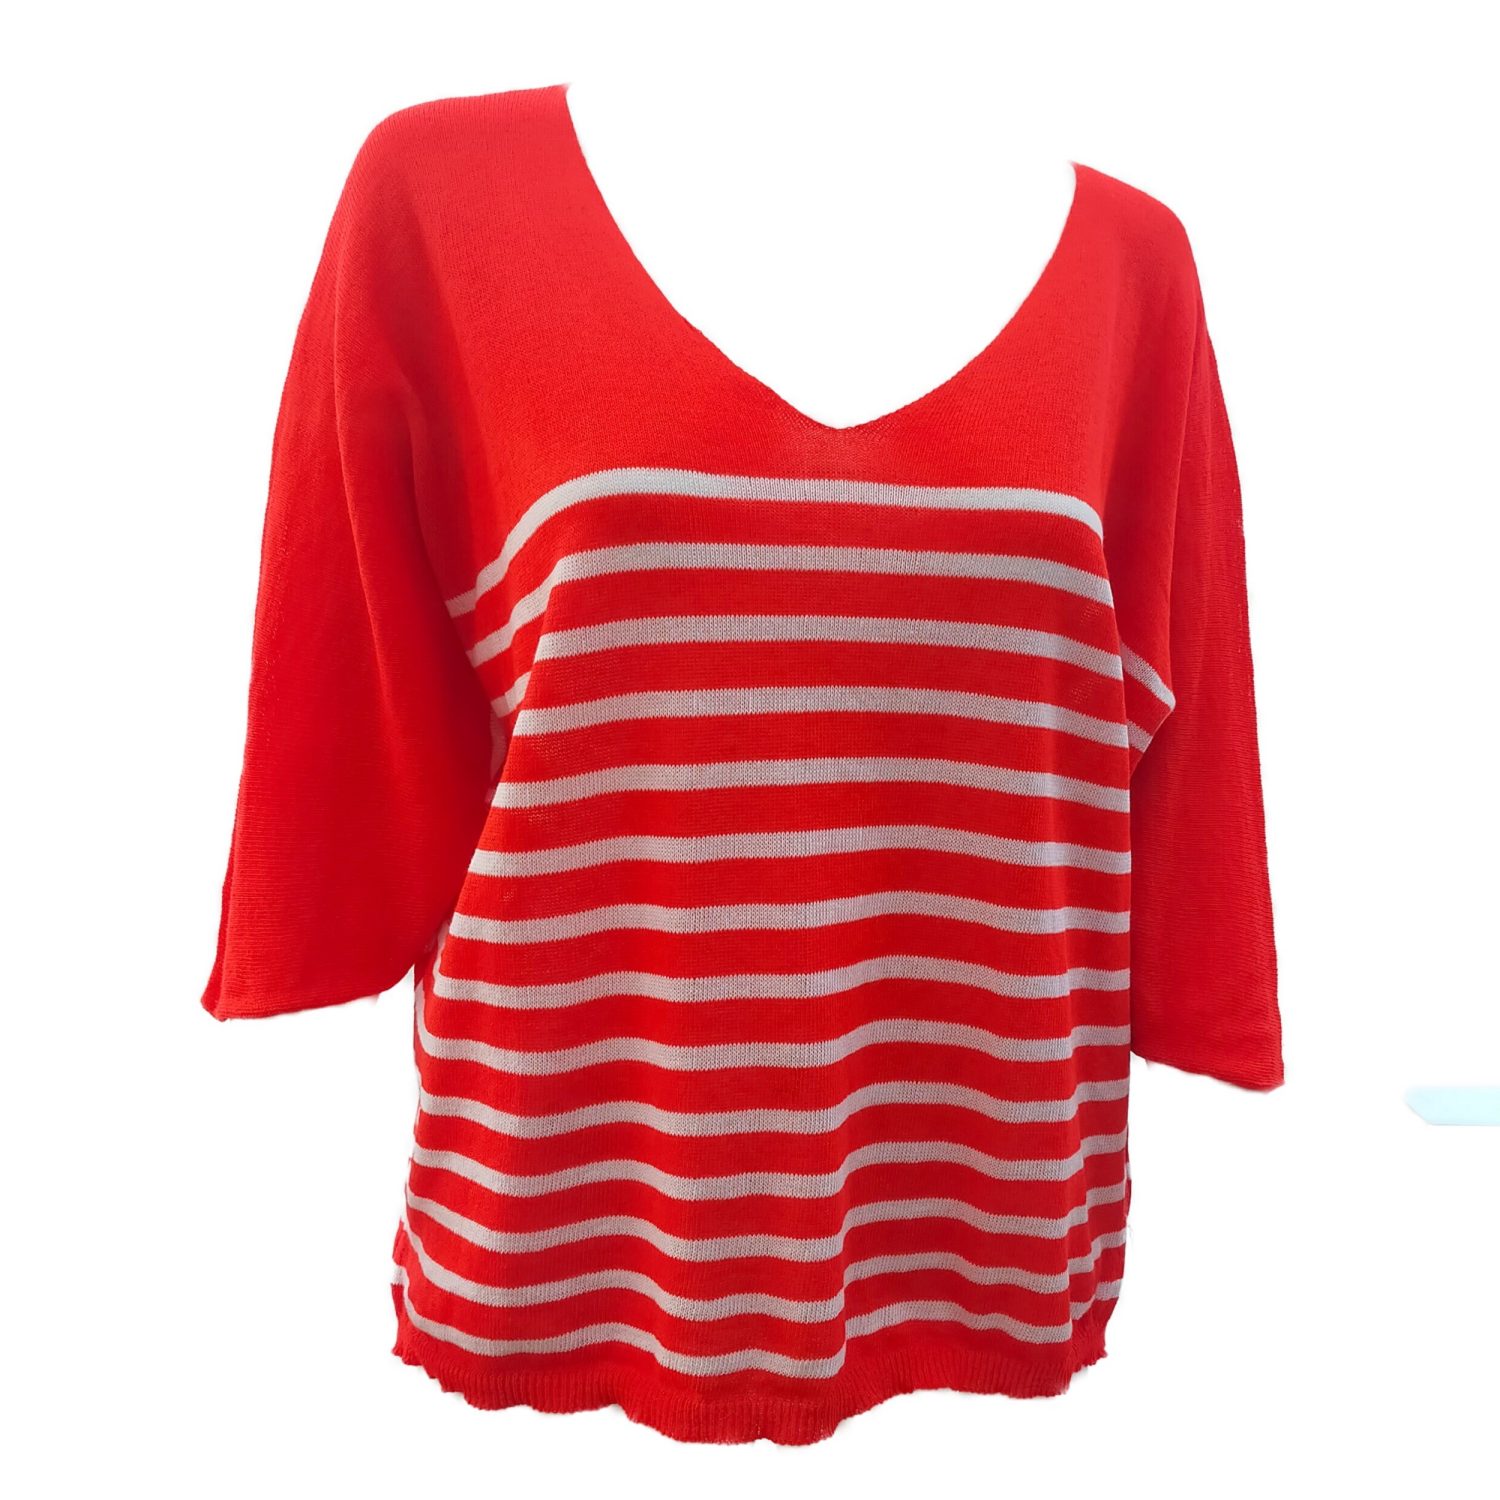 red and white striped top